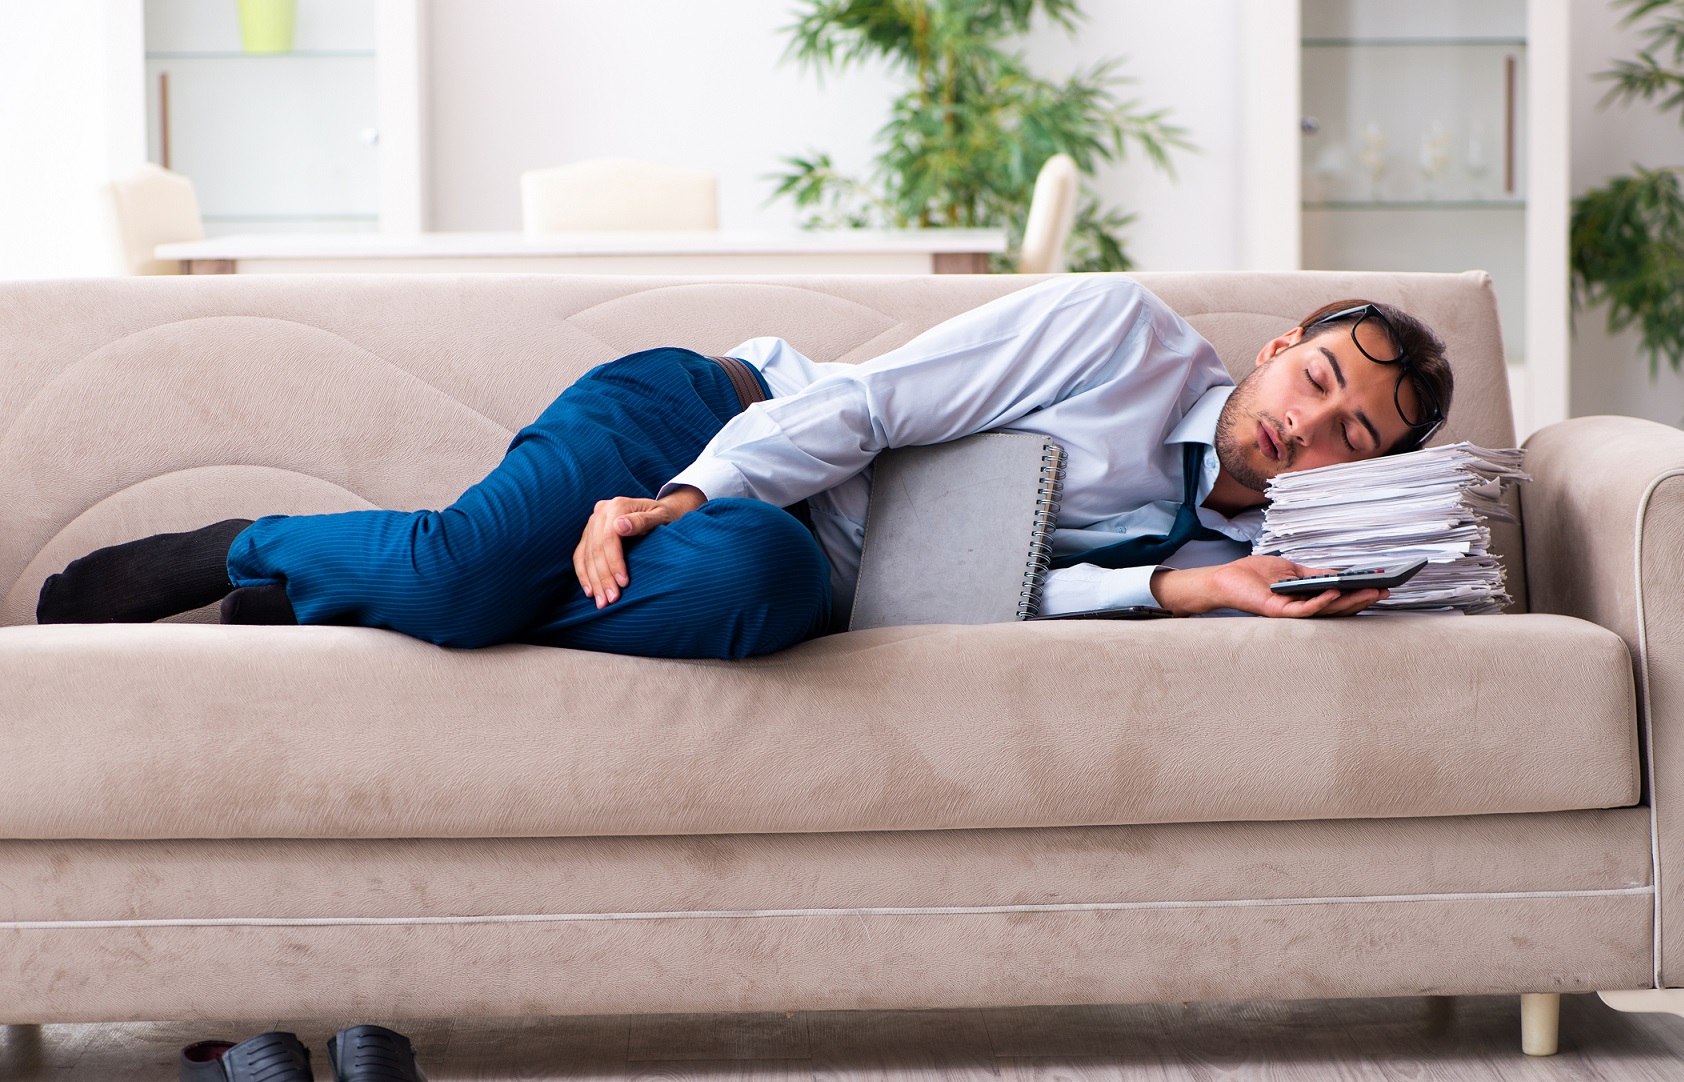 How To Sleep Well While Working From Home